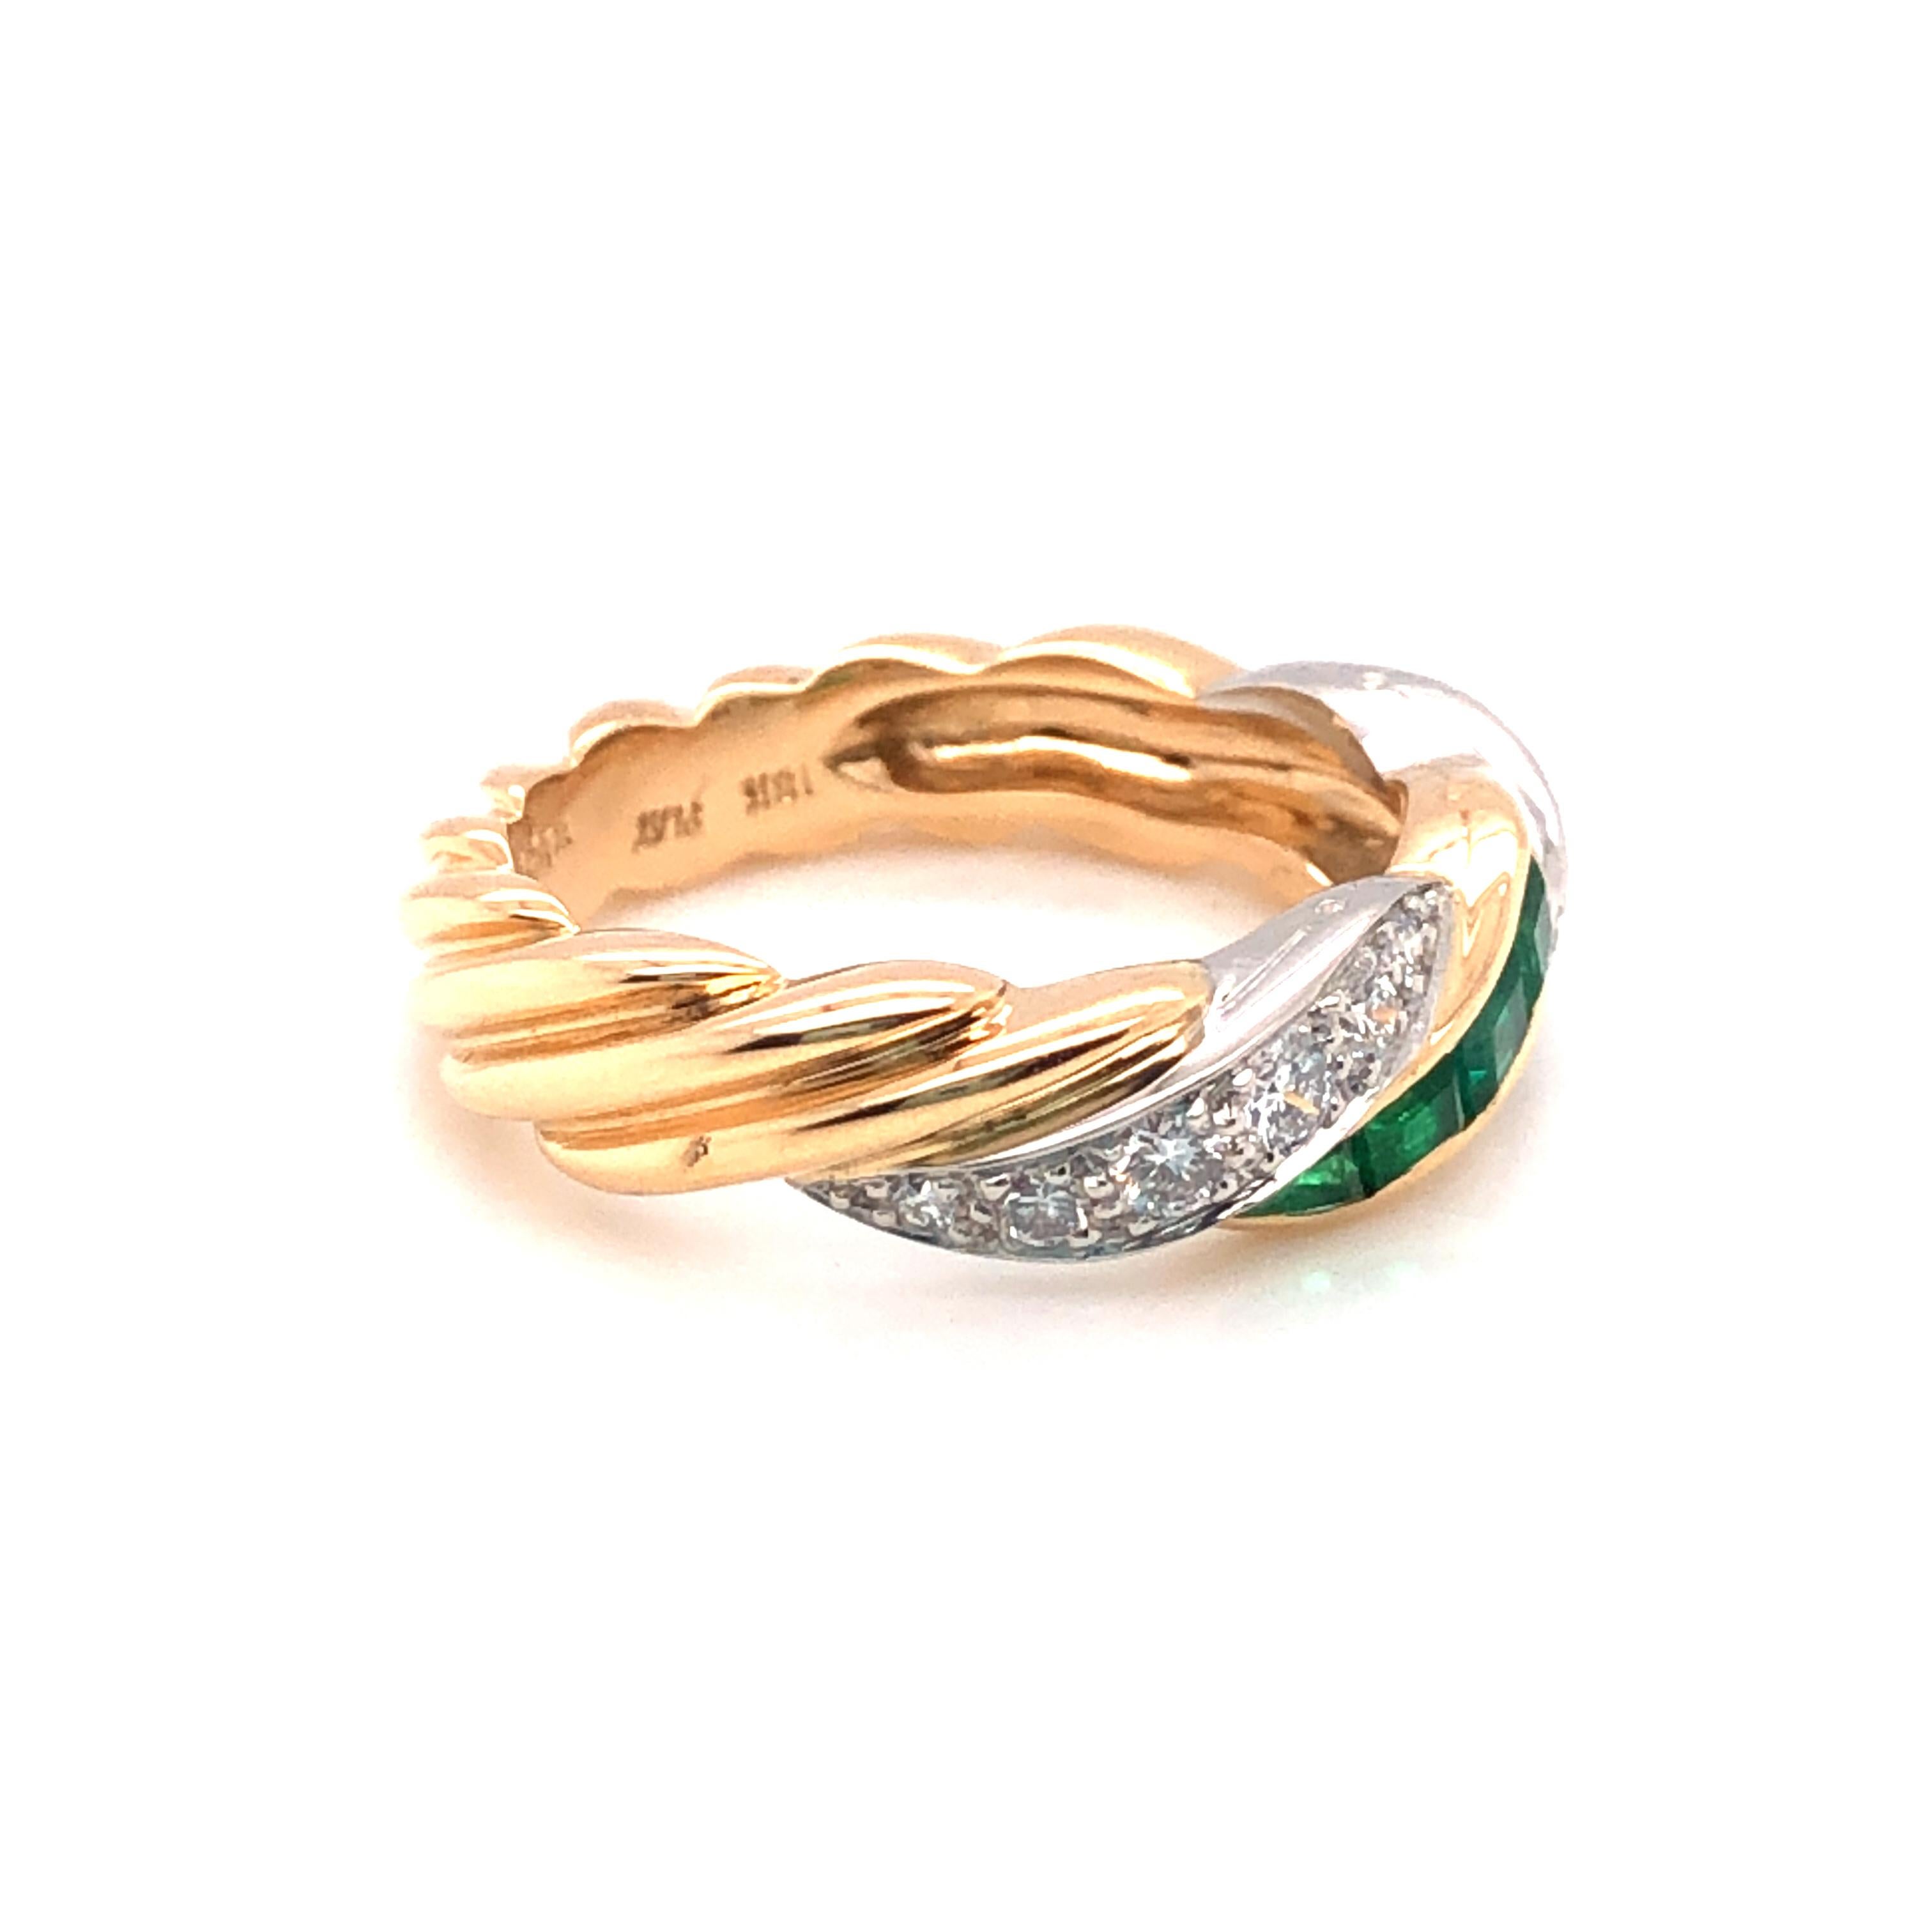 Oscar Heyman 18k yellow gold and platinum square emerald (0.40tcw) and round diamond (0.37tcw ) twist partway wedding band ring. It is stamped with the makers mark, 18K PLAT, and serial number J1712. Top of the ring is 6mm wide and tapers at the